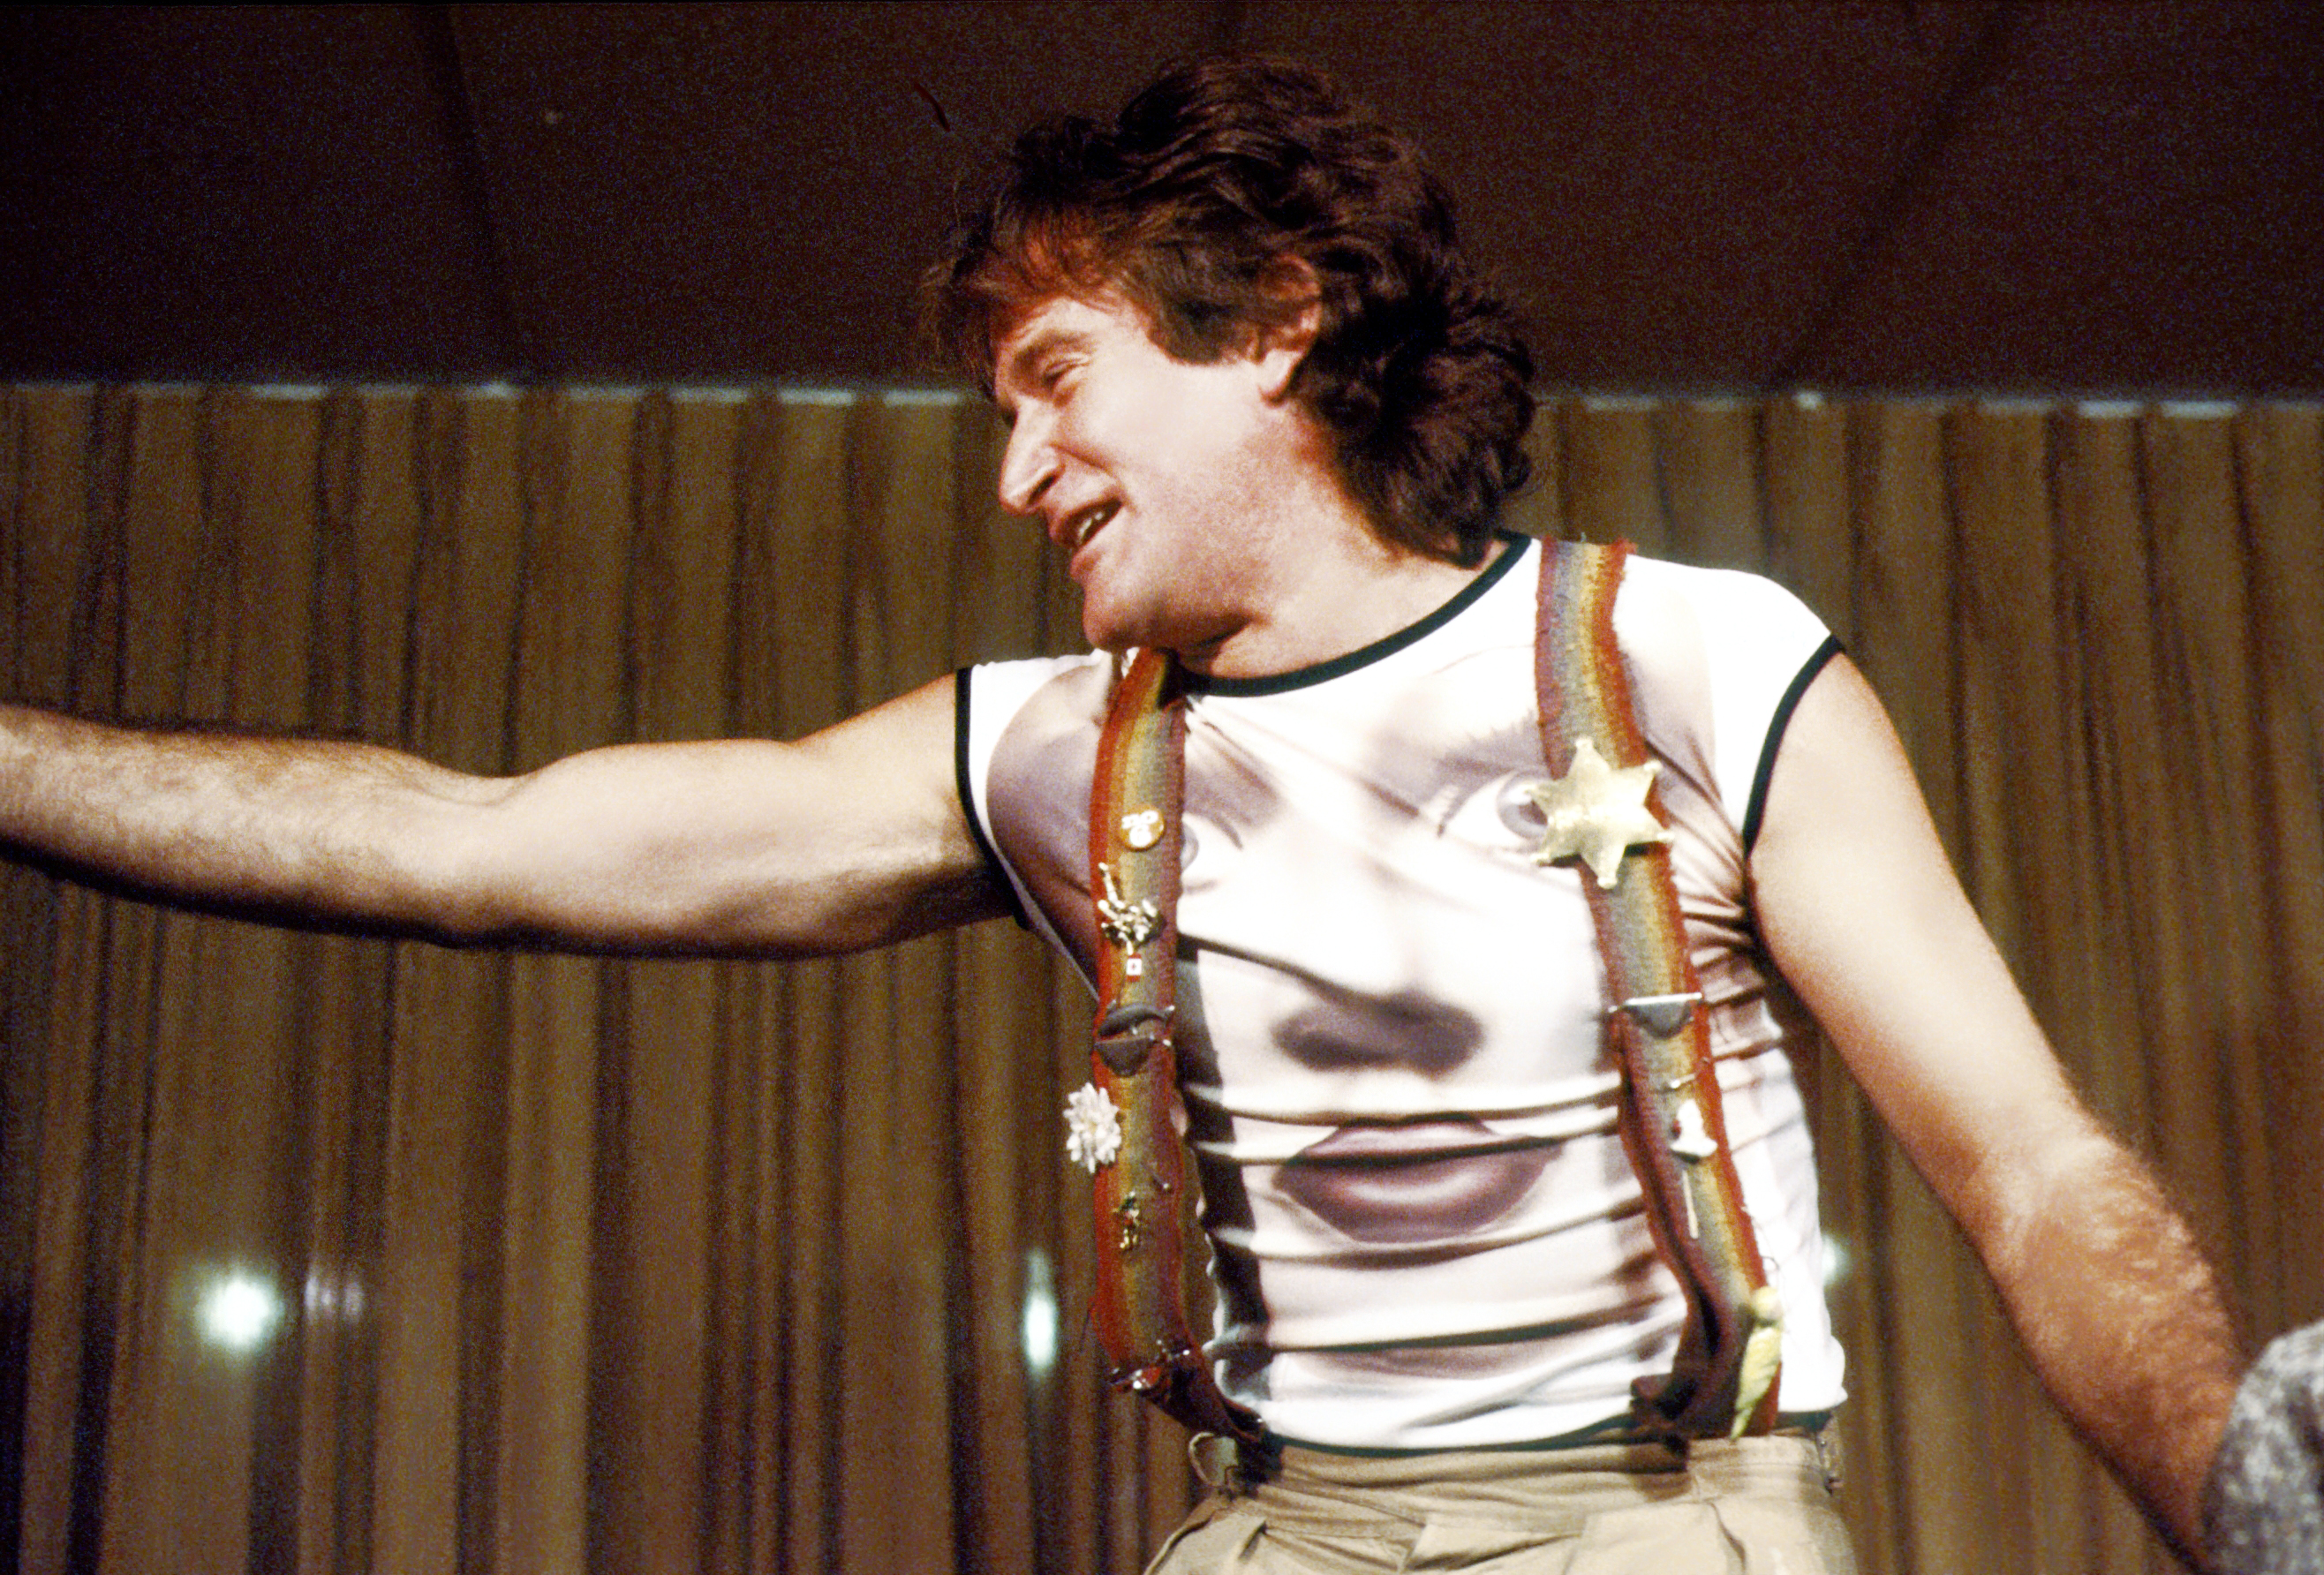 Robin Williams in rainbow stripes and a T-shirt with a face print at the Roxy Theater in 1979